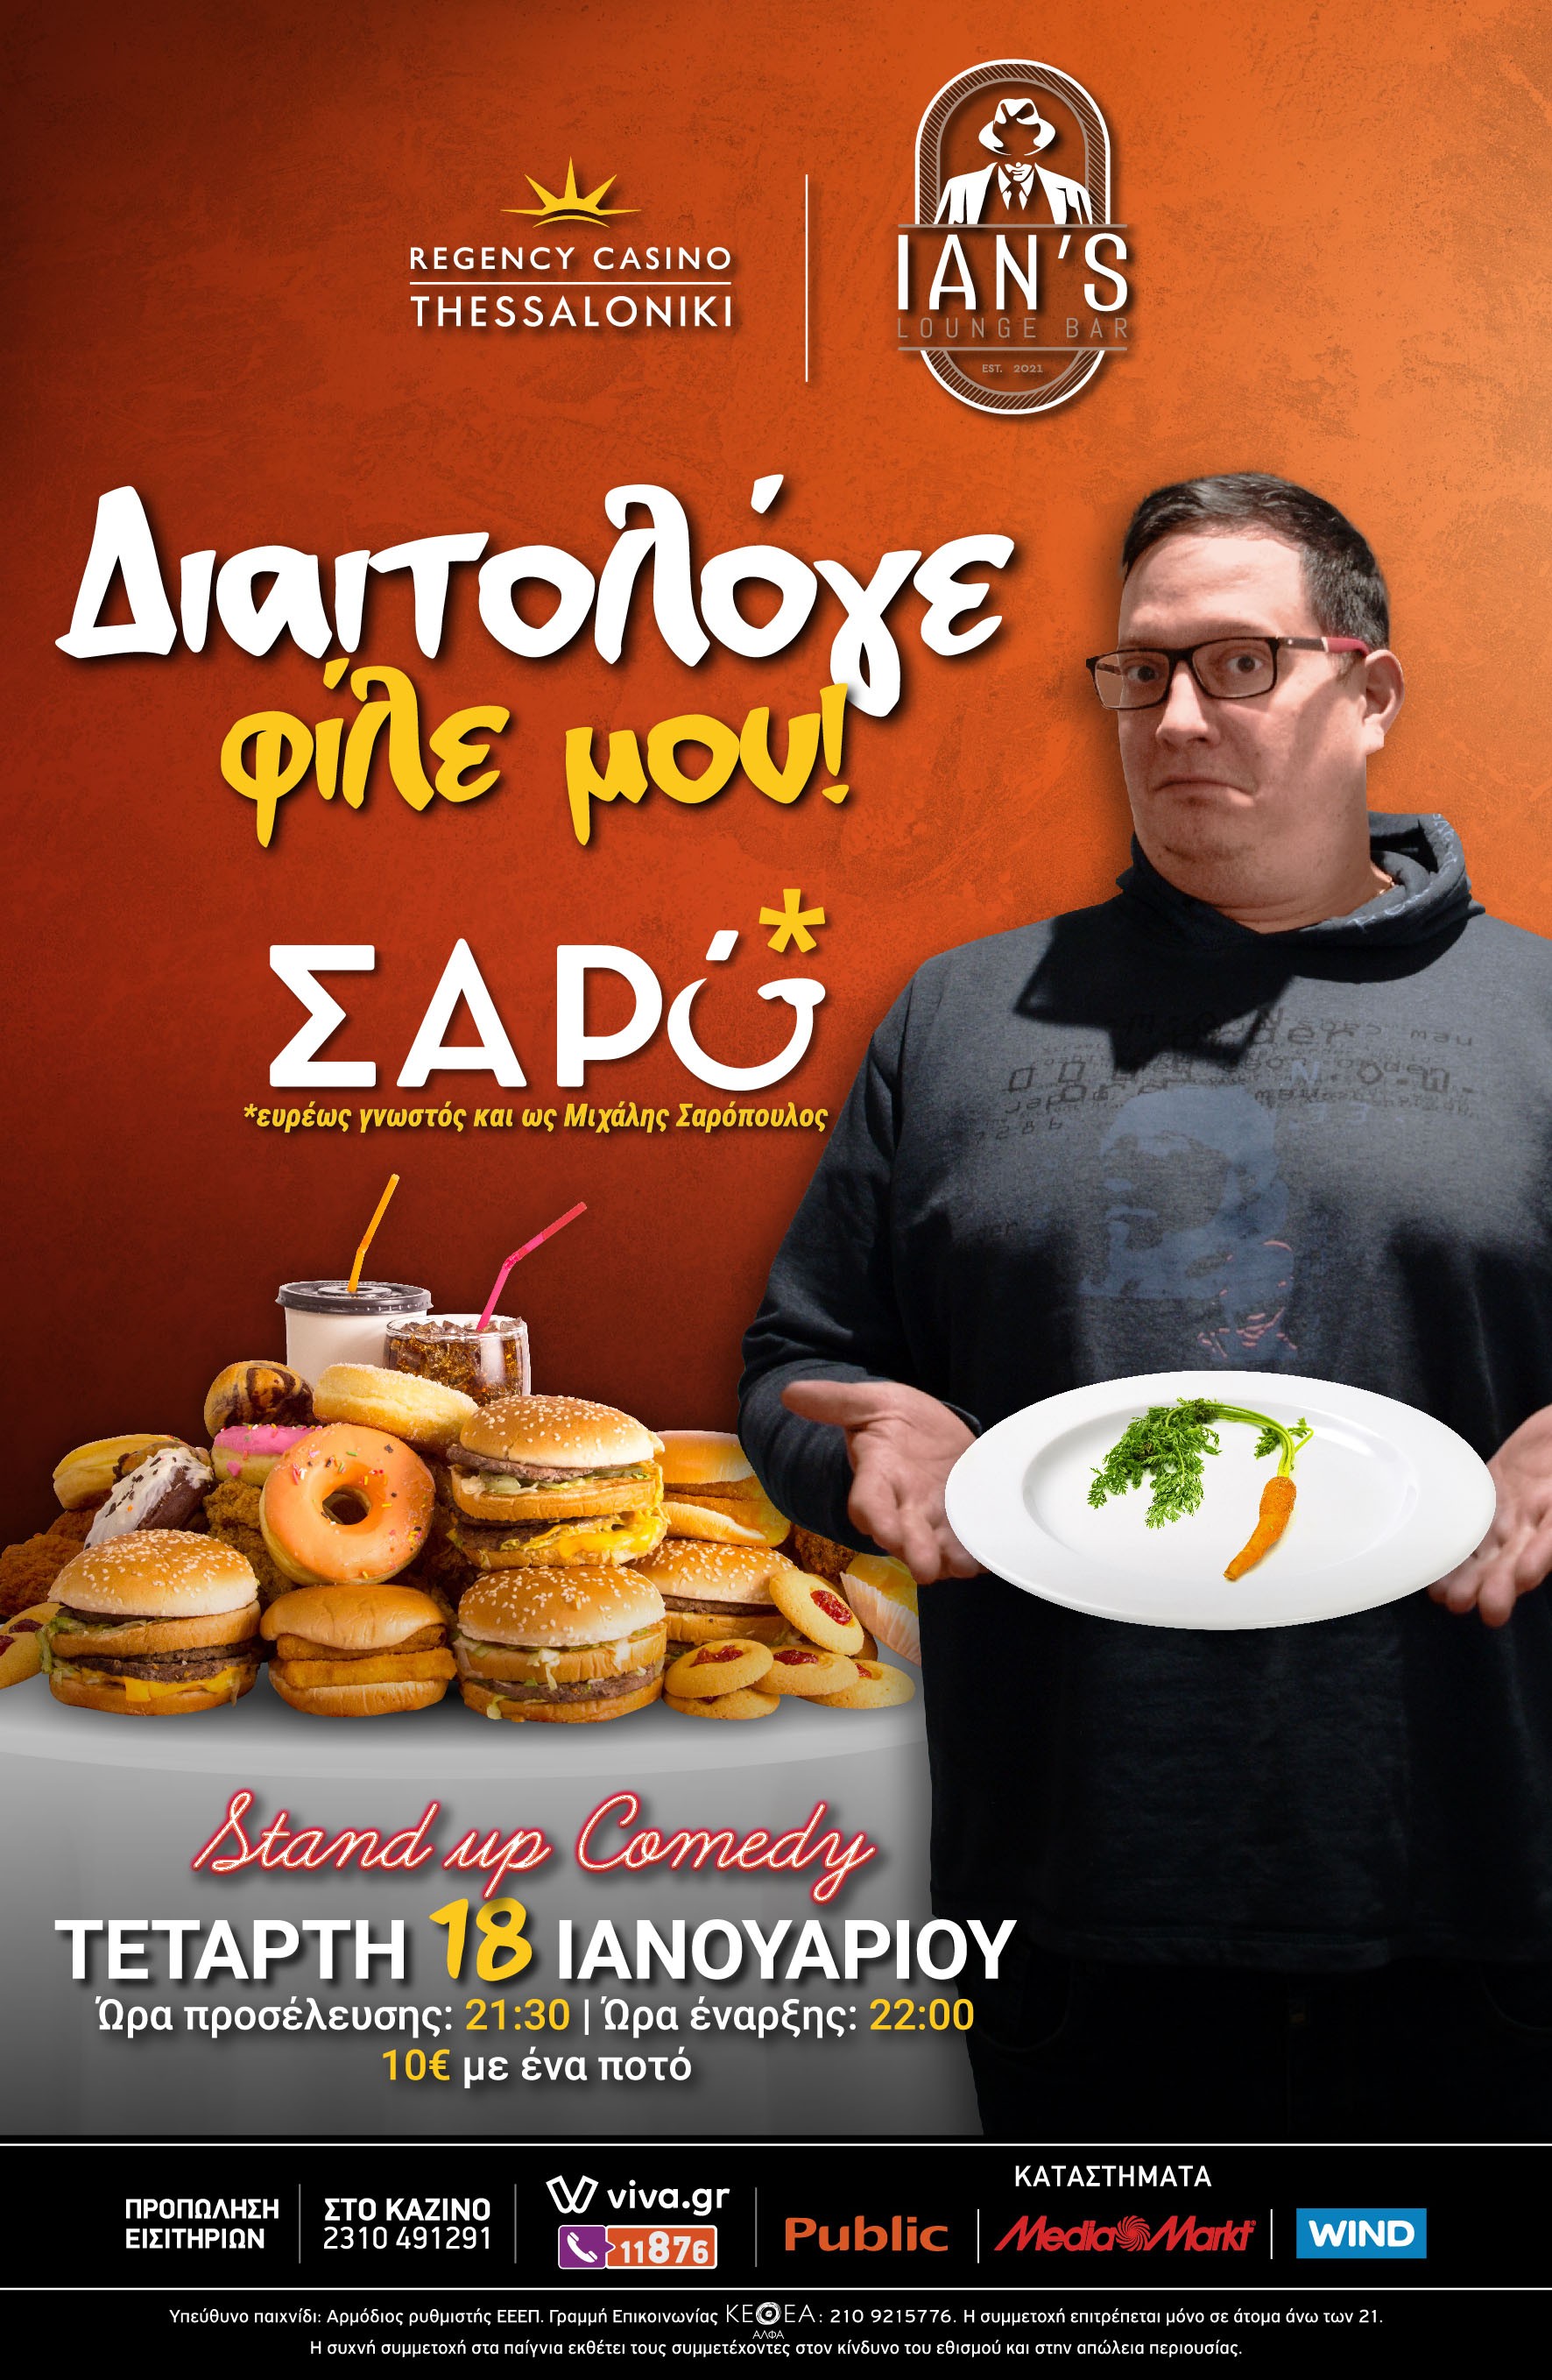 ians-saropoulos-dietologe-file-mou-poster-preview.jpg